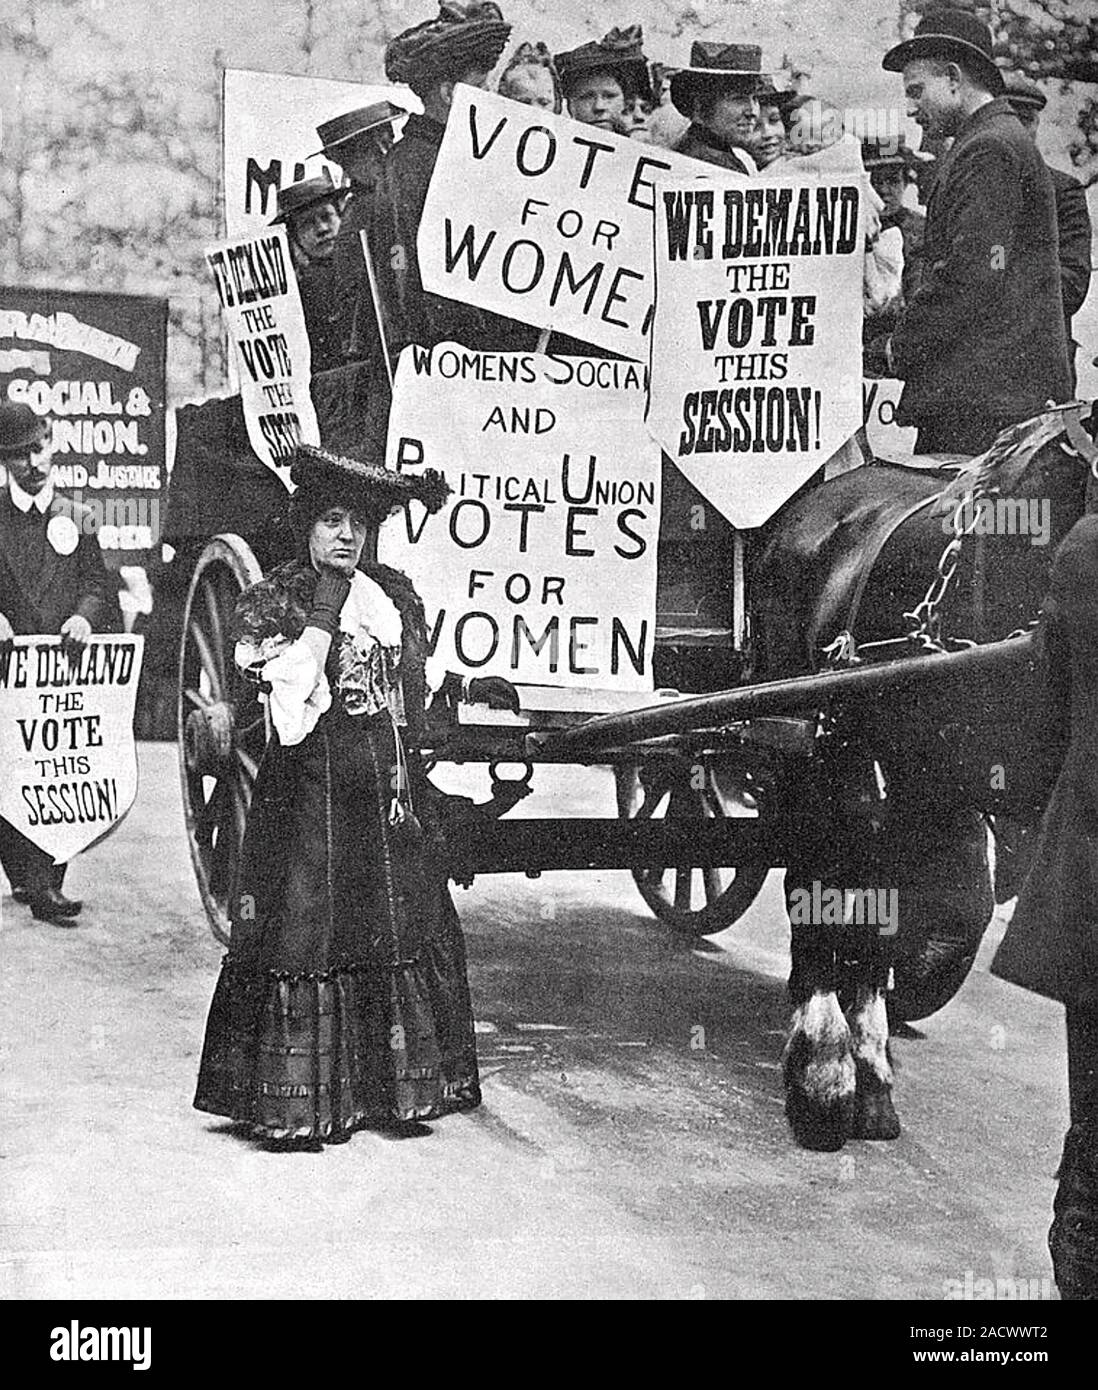 WSPU DEMONSTRATION IN 1906. Frances Rowe walks alongside a horse-drawn cart with members of the Womens Social and Political Union. Stock Photo